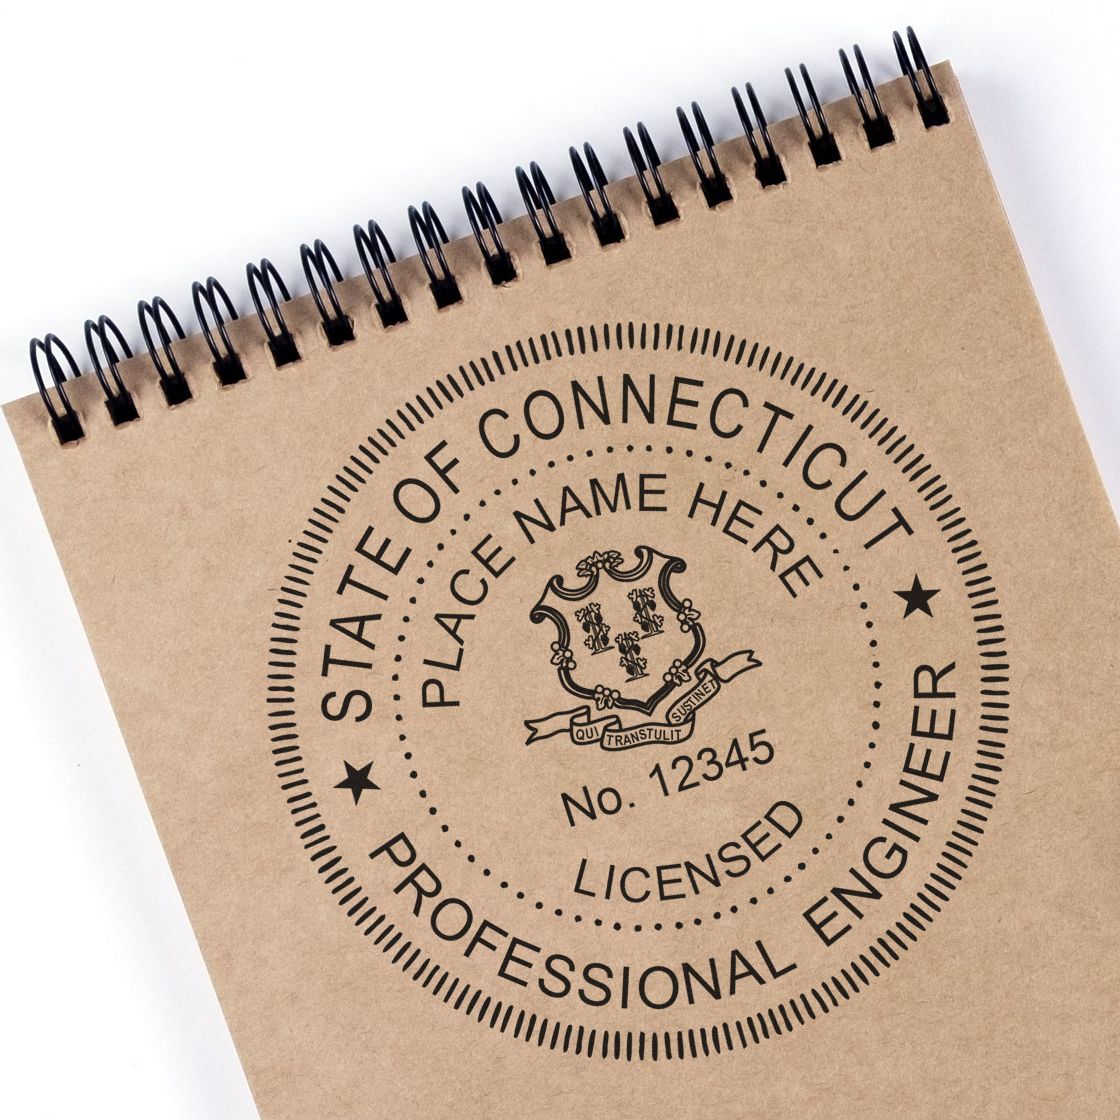 Building with Confidence: Meeting Connecticut PE Stamp Guidelines Feature Image